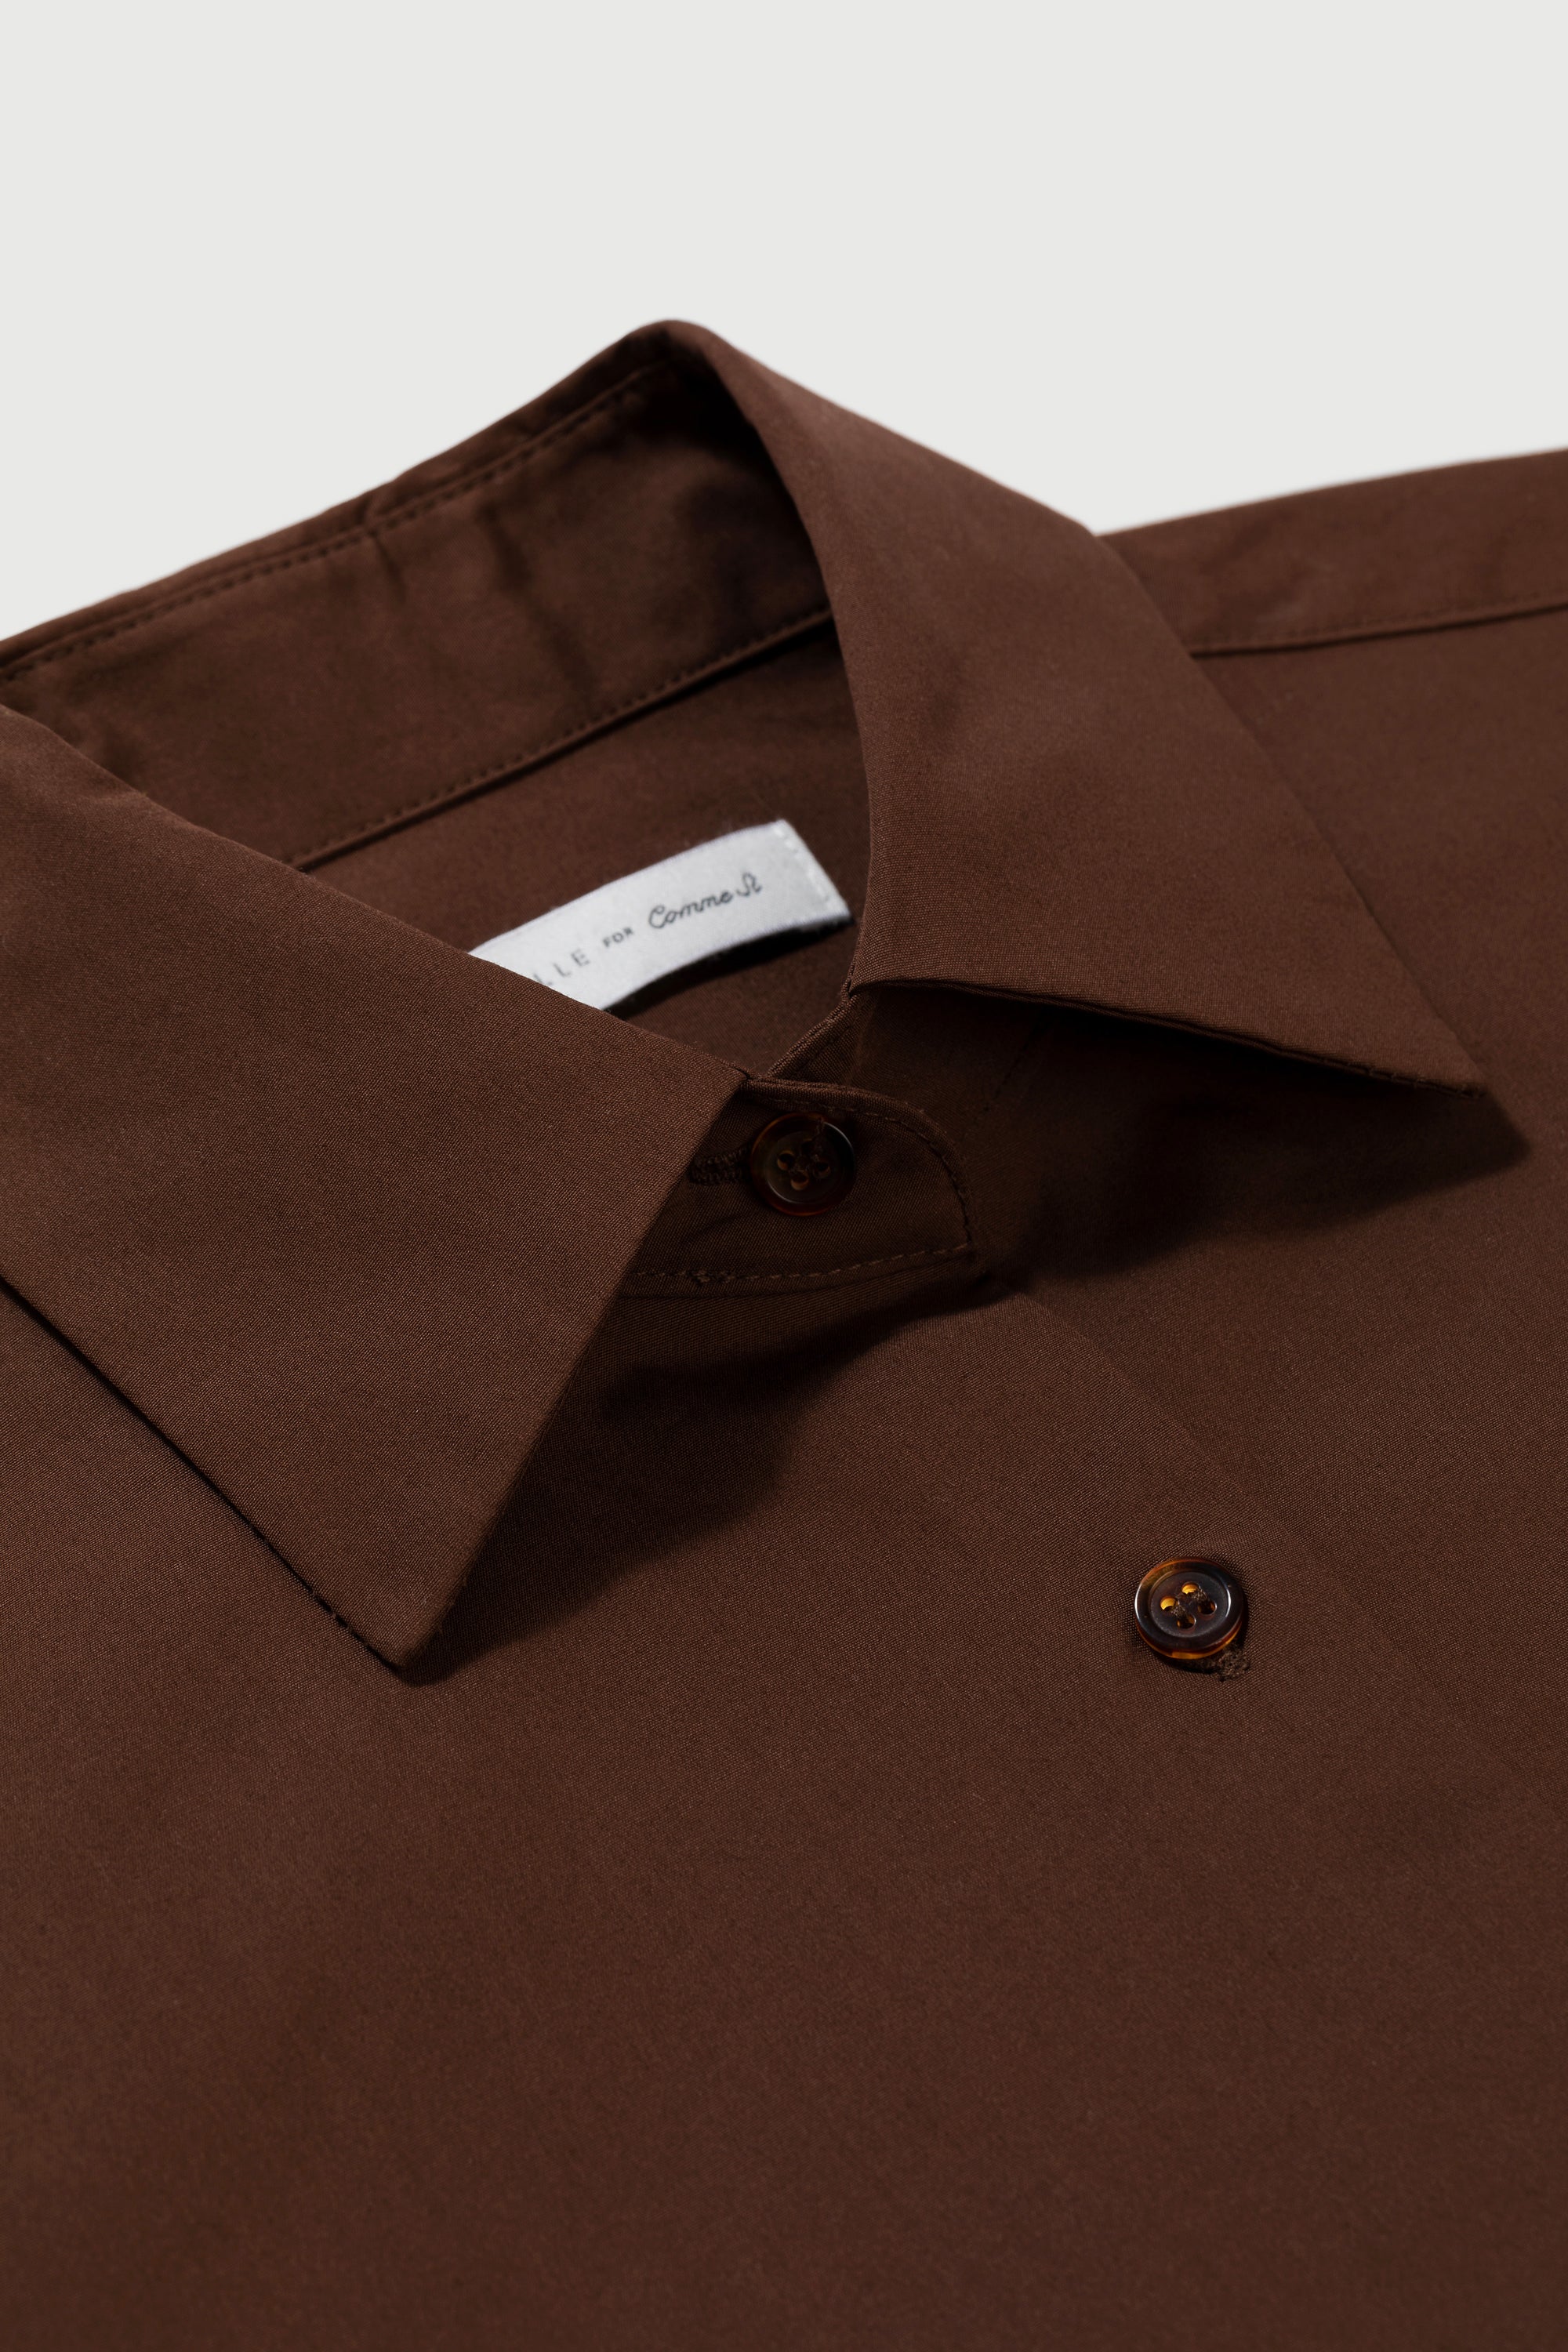 Collar Detail - The Studio Shirt in Brown - Danielle for Comme Si